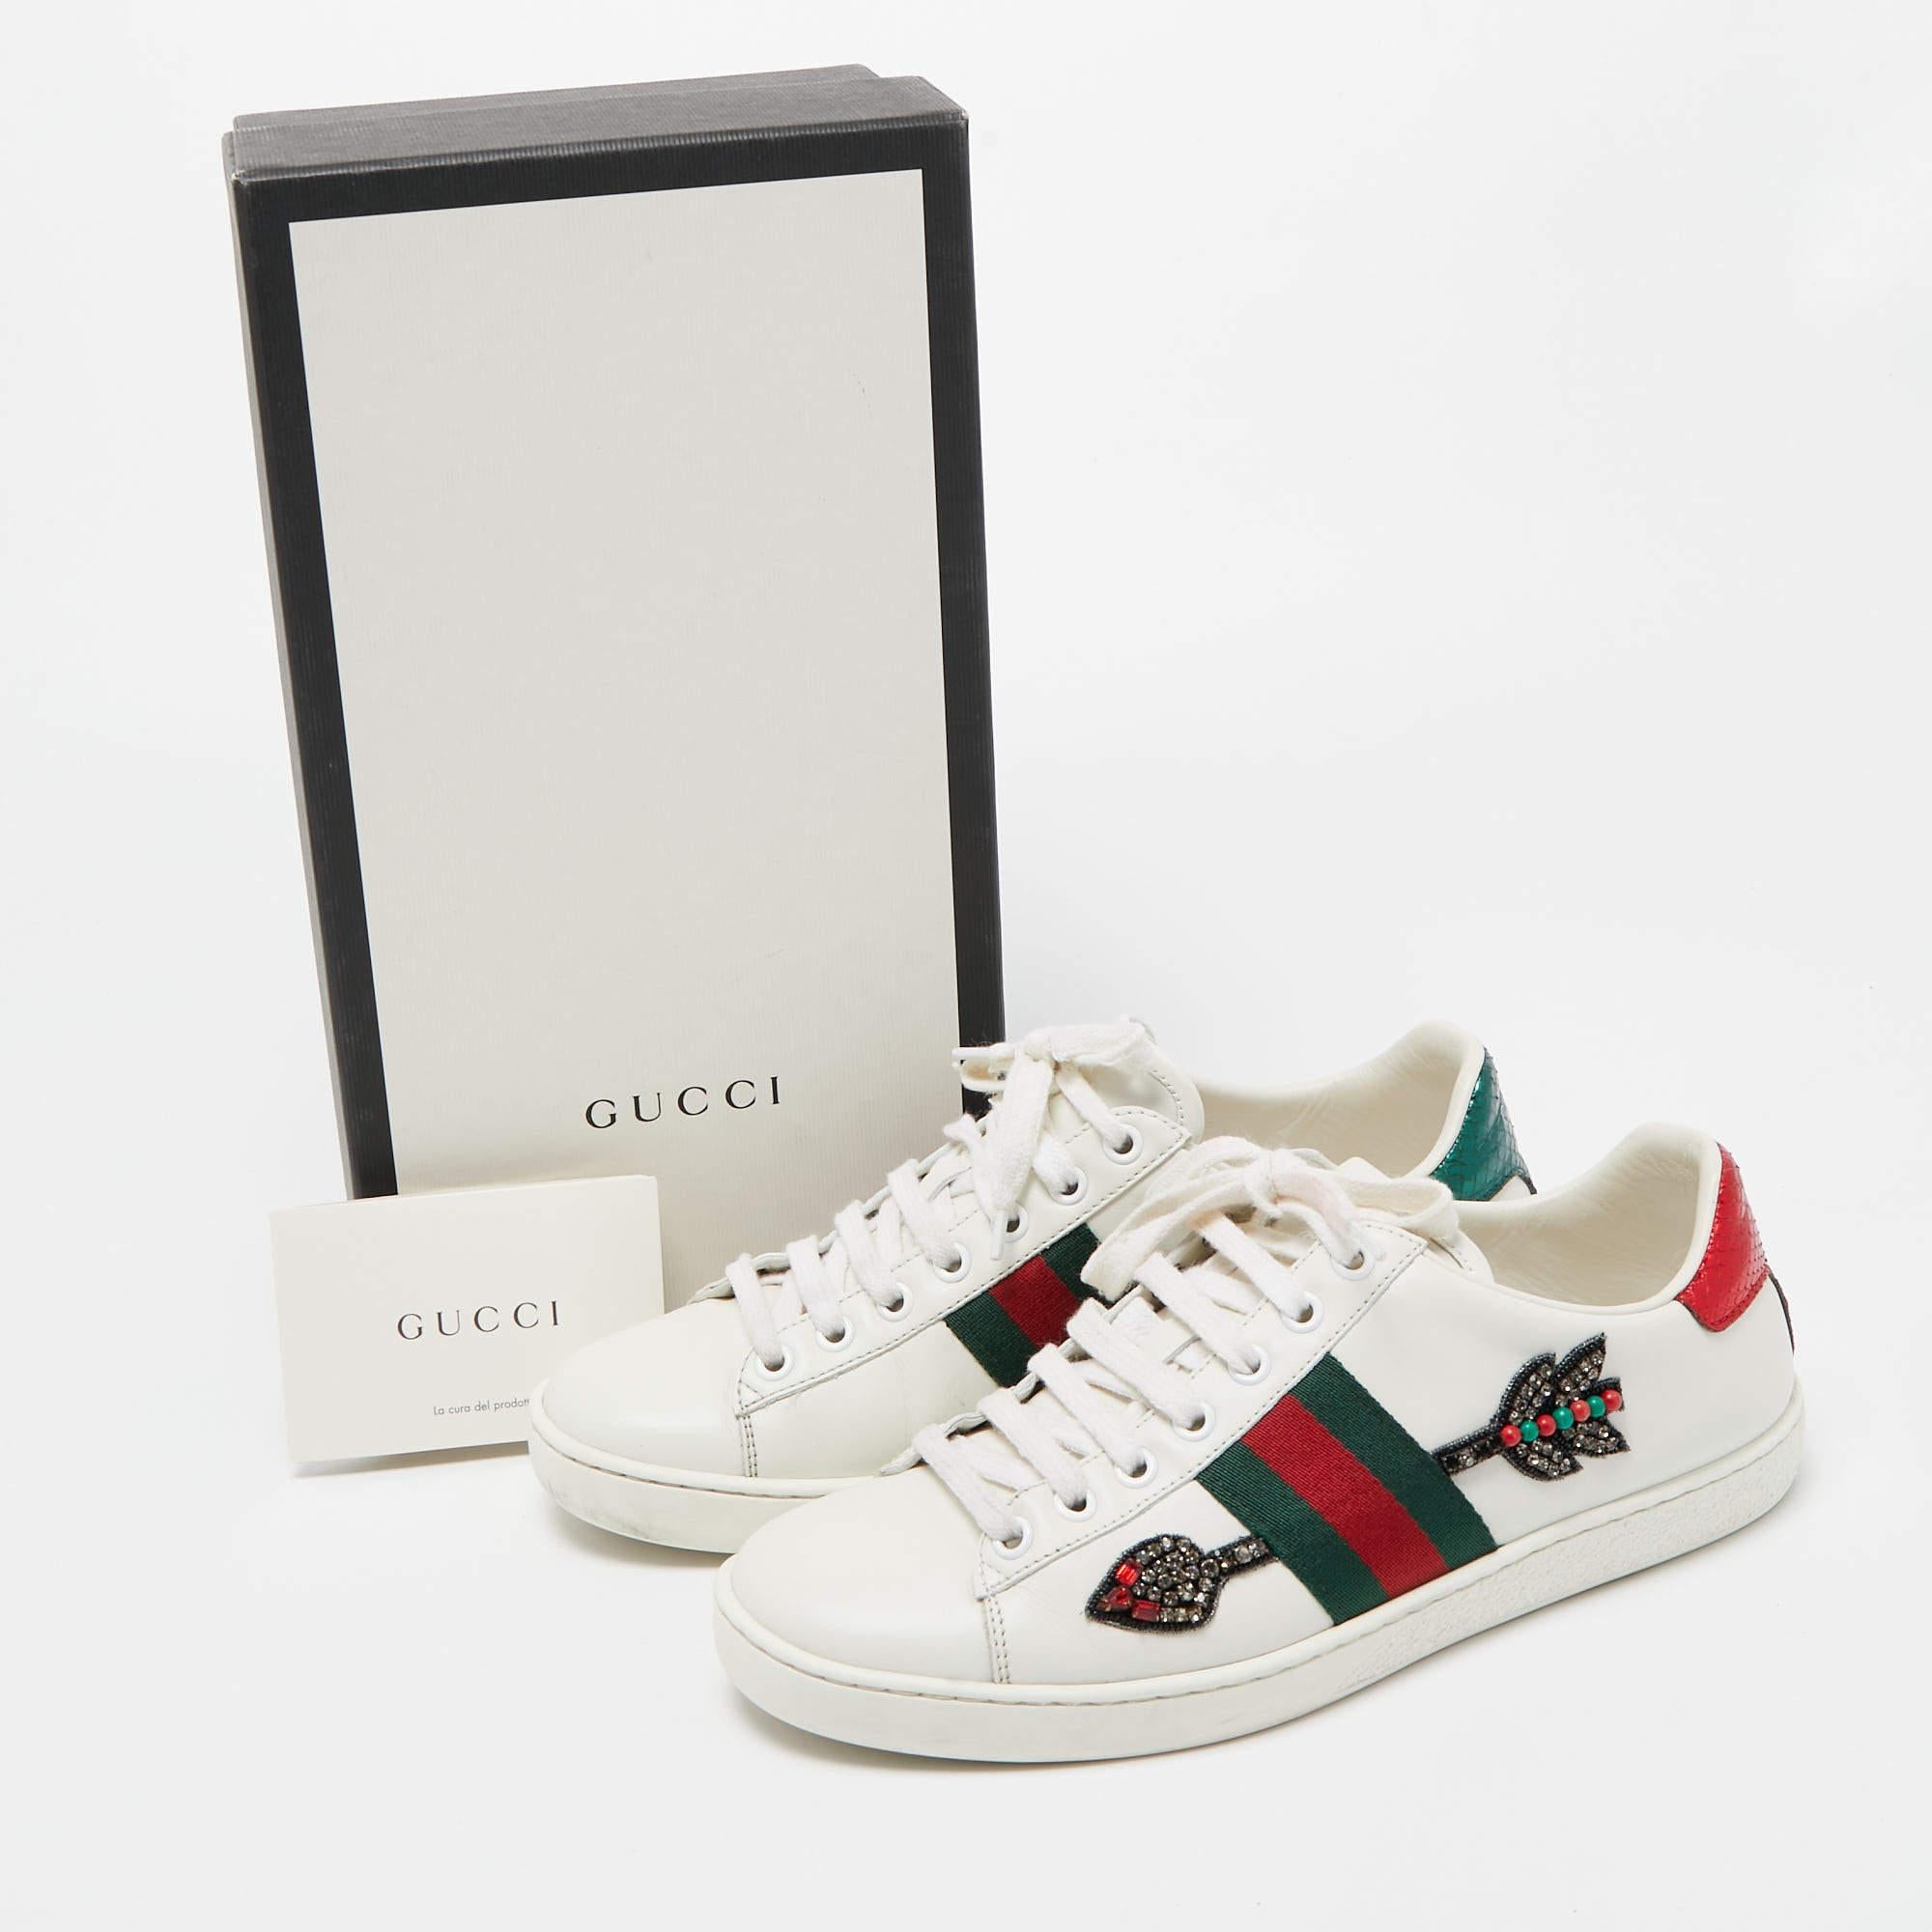 Gucci White Arrow Embellished Leather Ace Low Top Sneakers Size 37 4